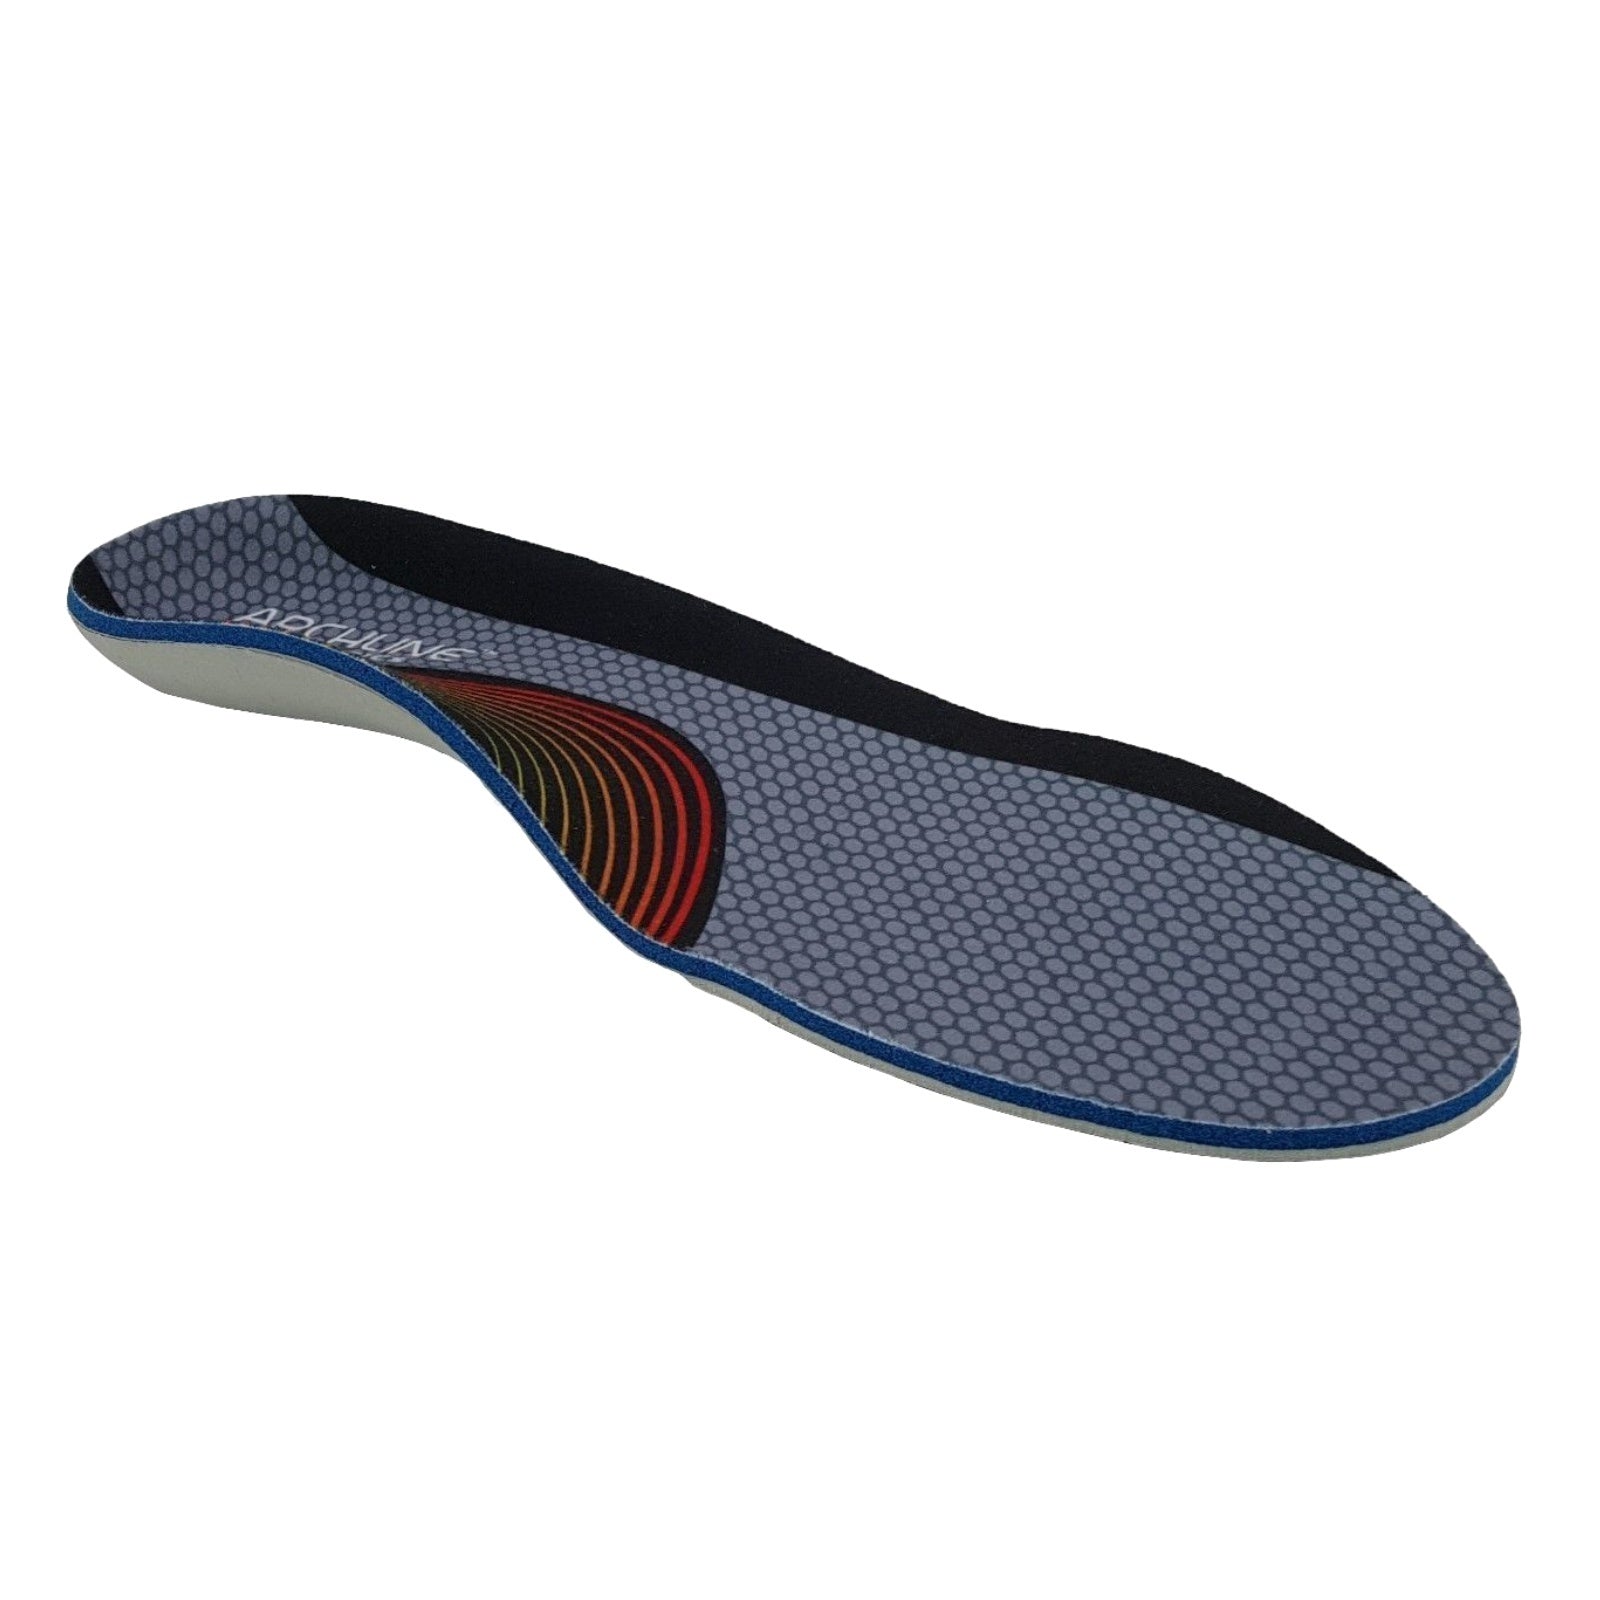 ARCHLINE Orthotics Insoles Balance Full Length Arch Support Pain Relief - EUR 36